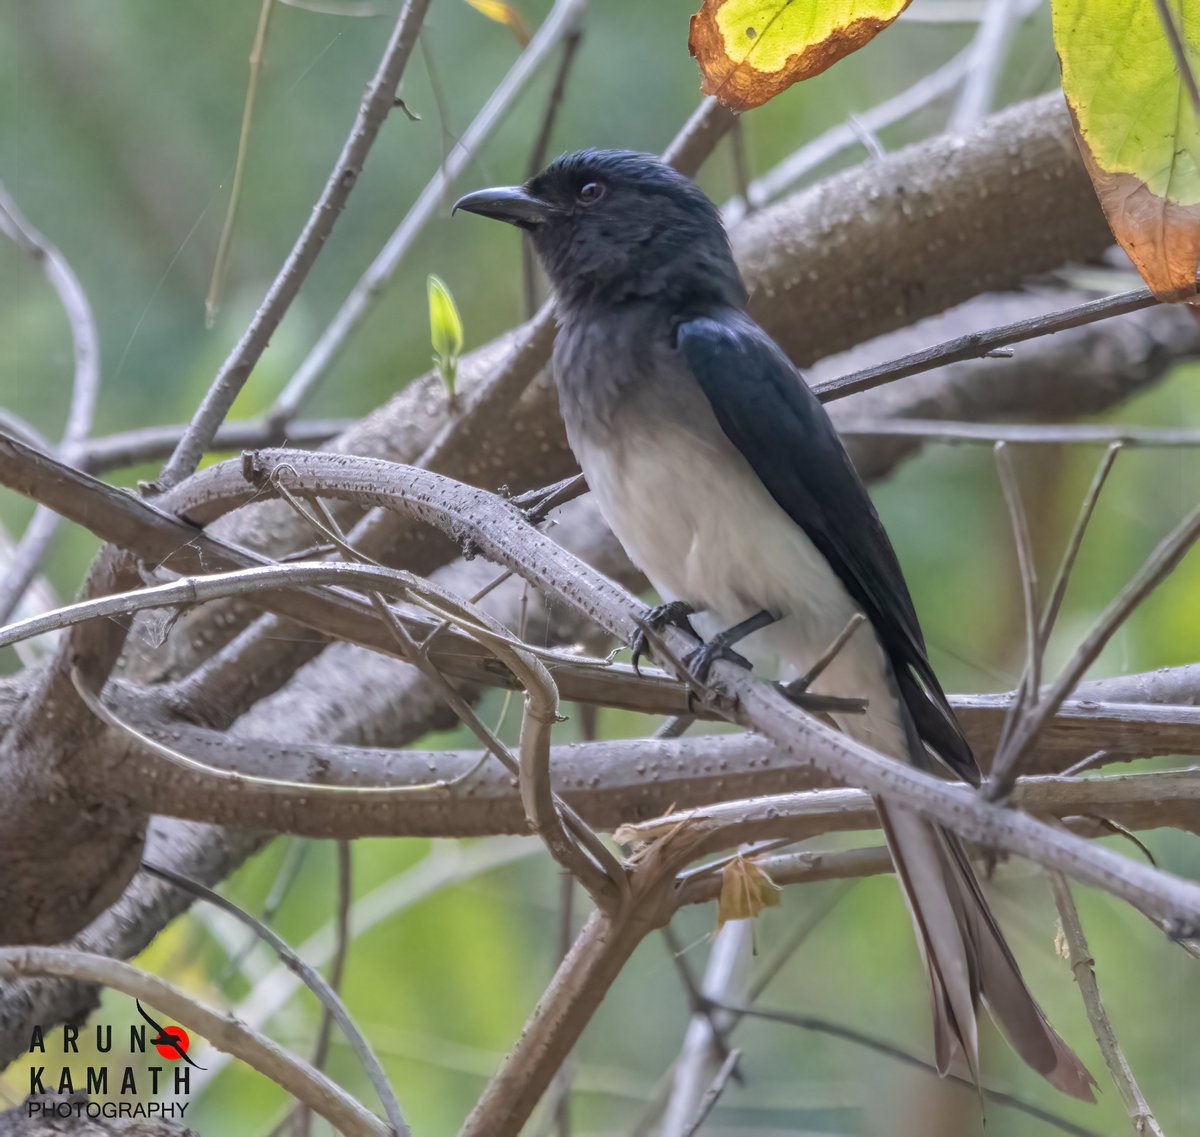 The white bellied drongo from Aravallis of Gurgaon. They are insectivorous and mainly black in colour, but with a white belly and vent. Young birds are, however, all black and may be confused with the black drongo. #indiaves #TwitterNaturePhotography #birds #thephotohour